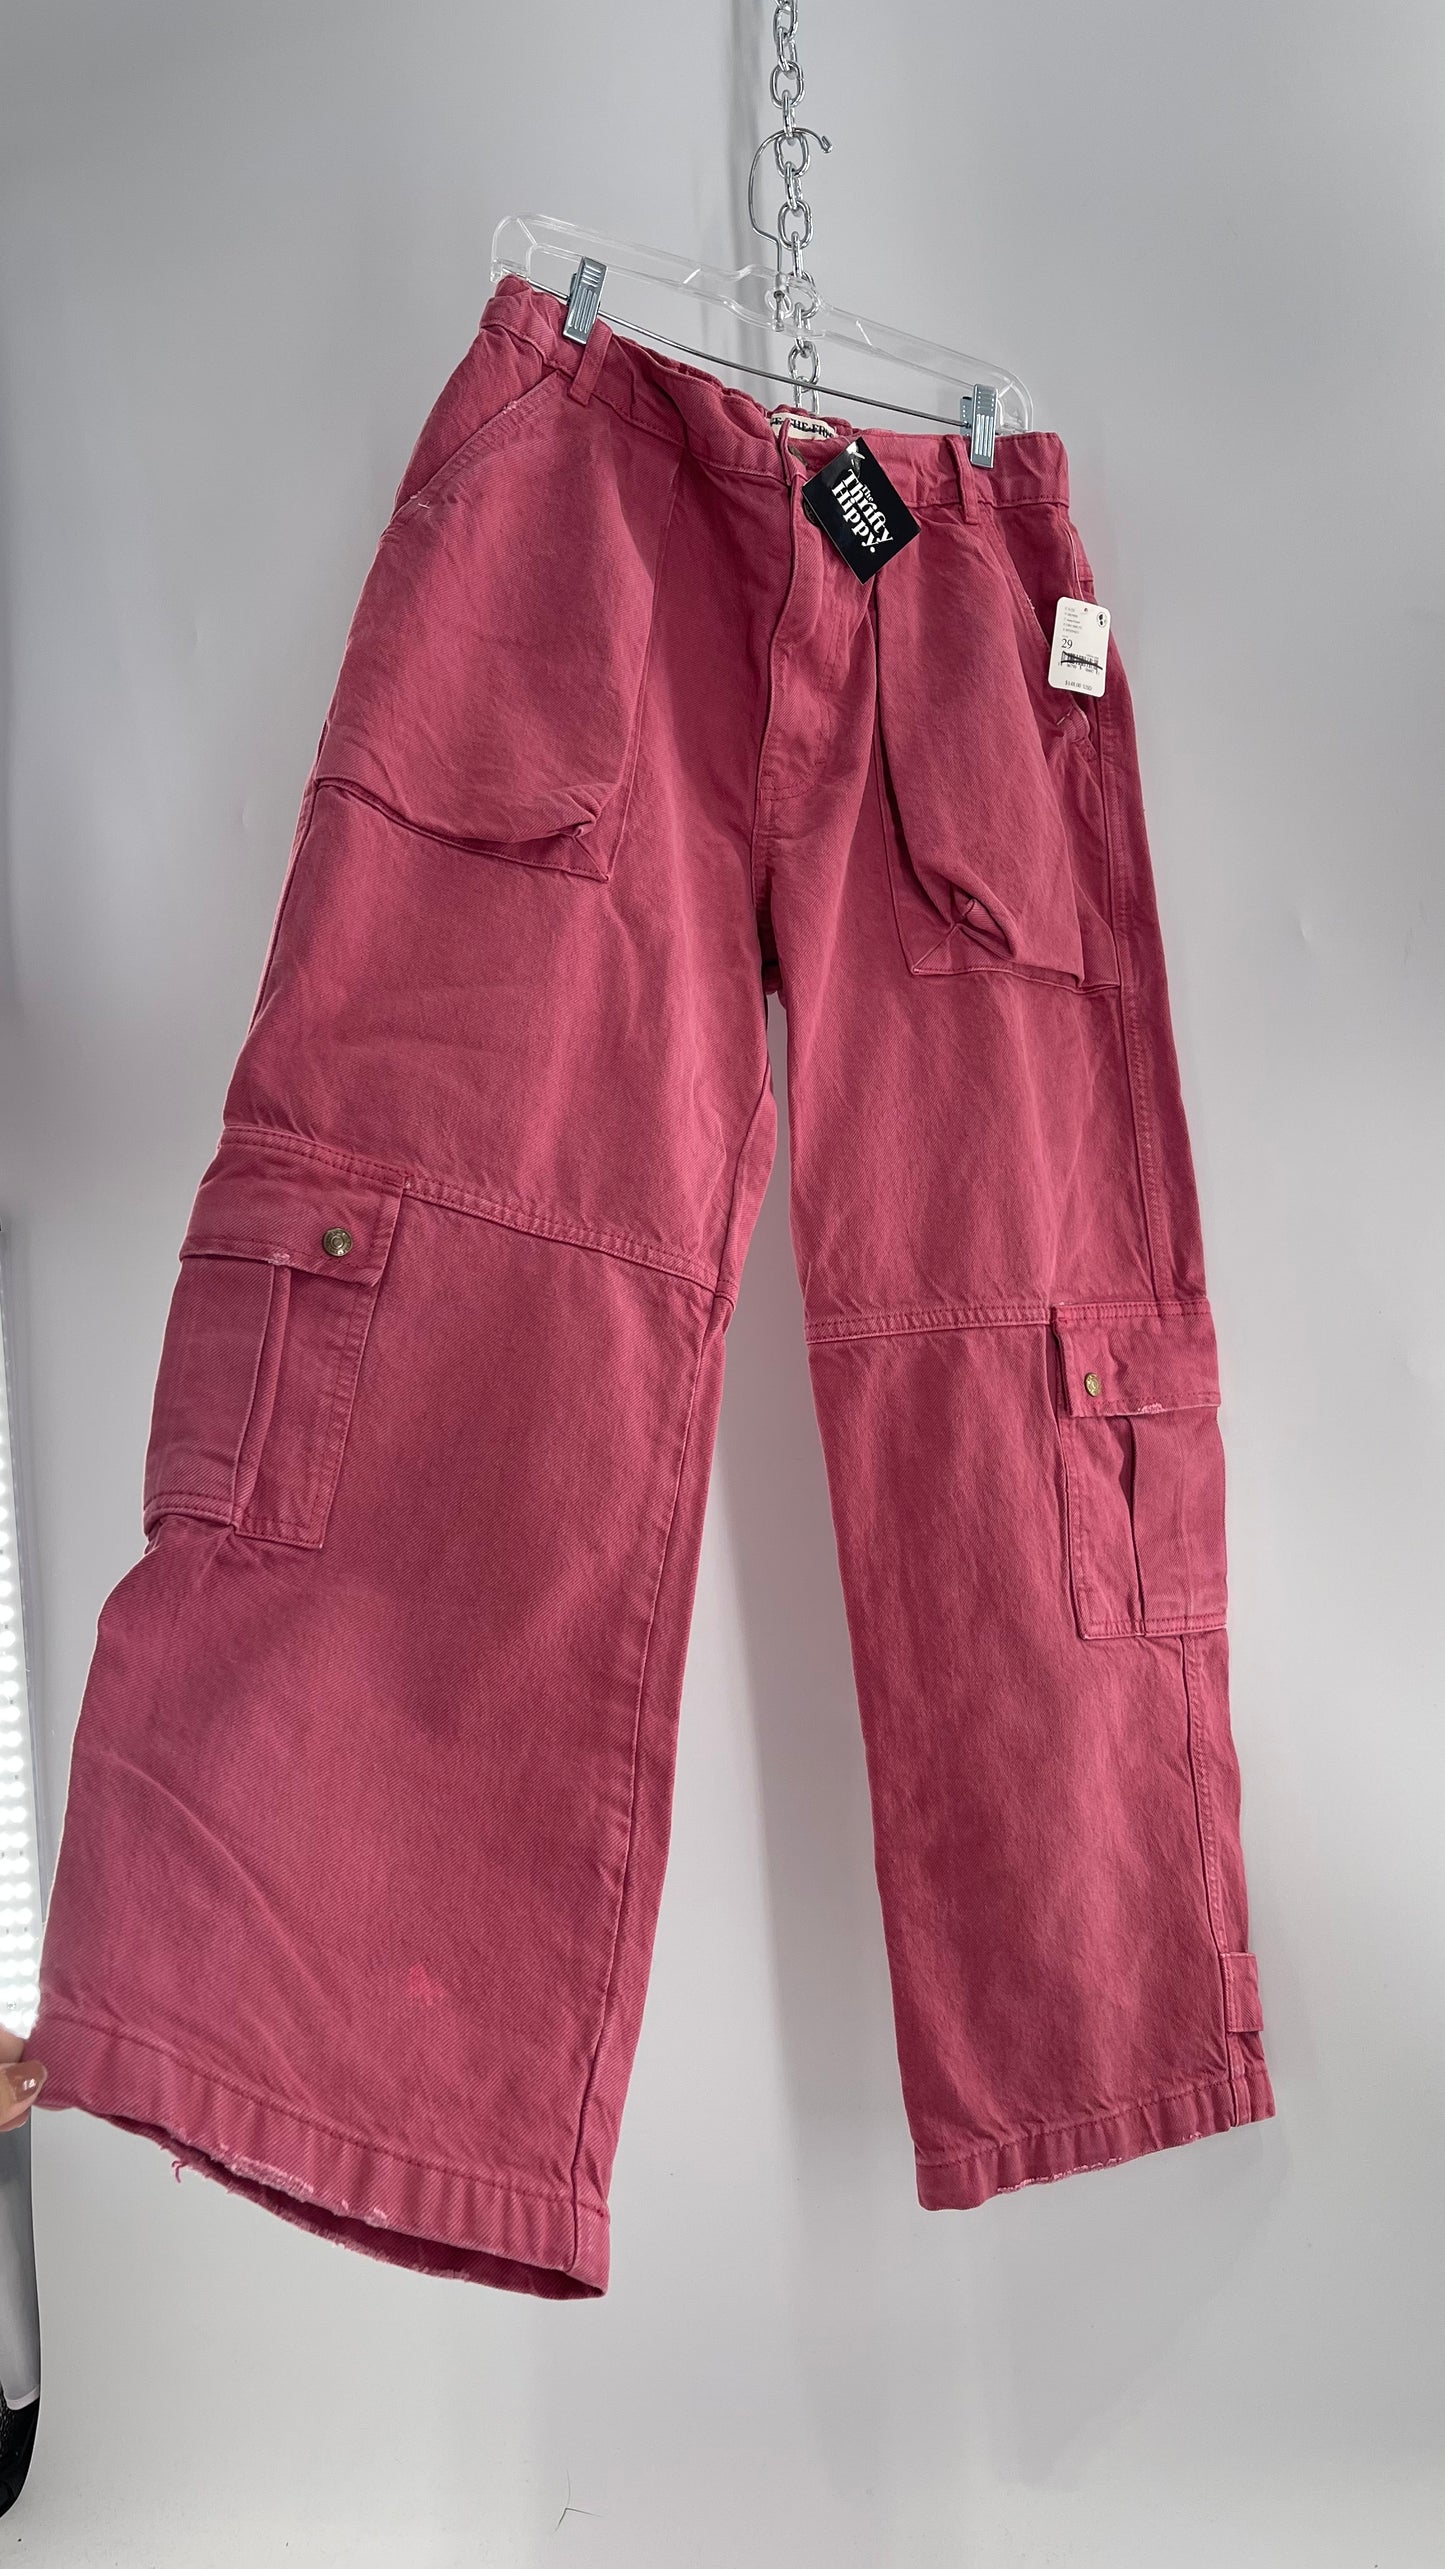 Free People Heavy Duty Mauve Pink Canvas/Carpenter Baggy Cargos with Tags Attached (29)